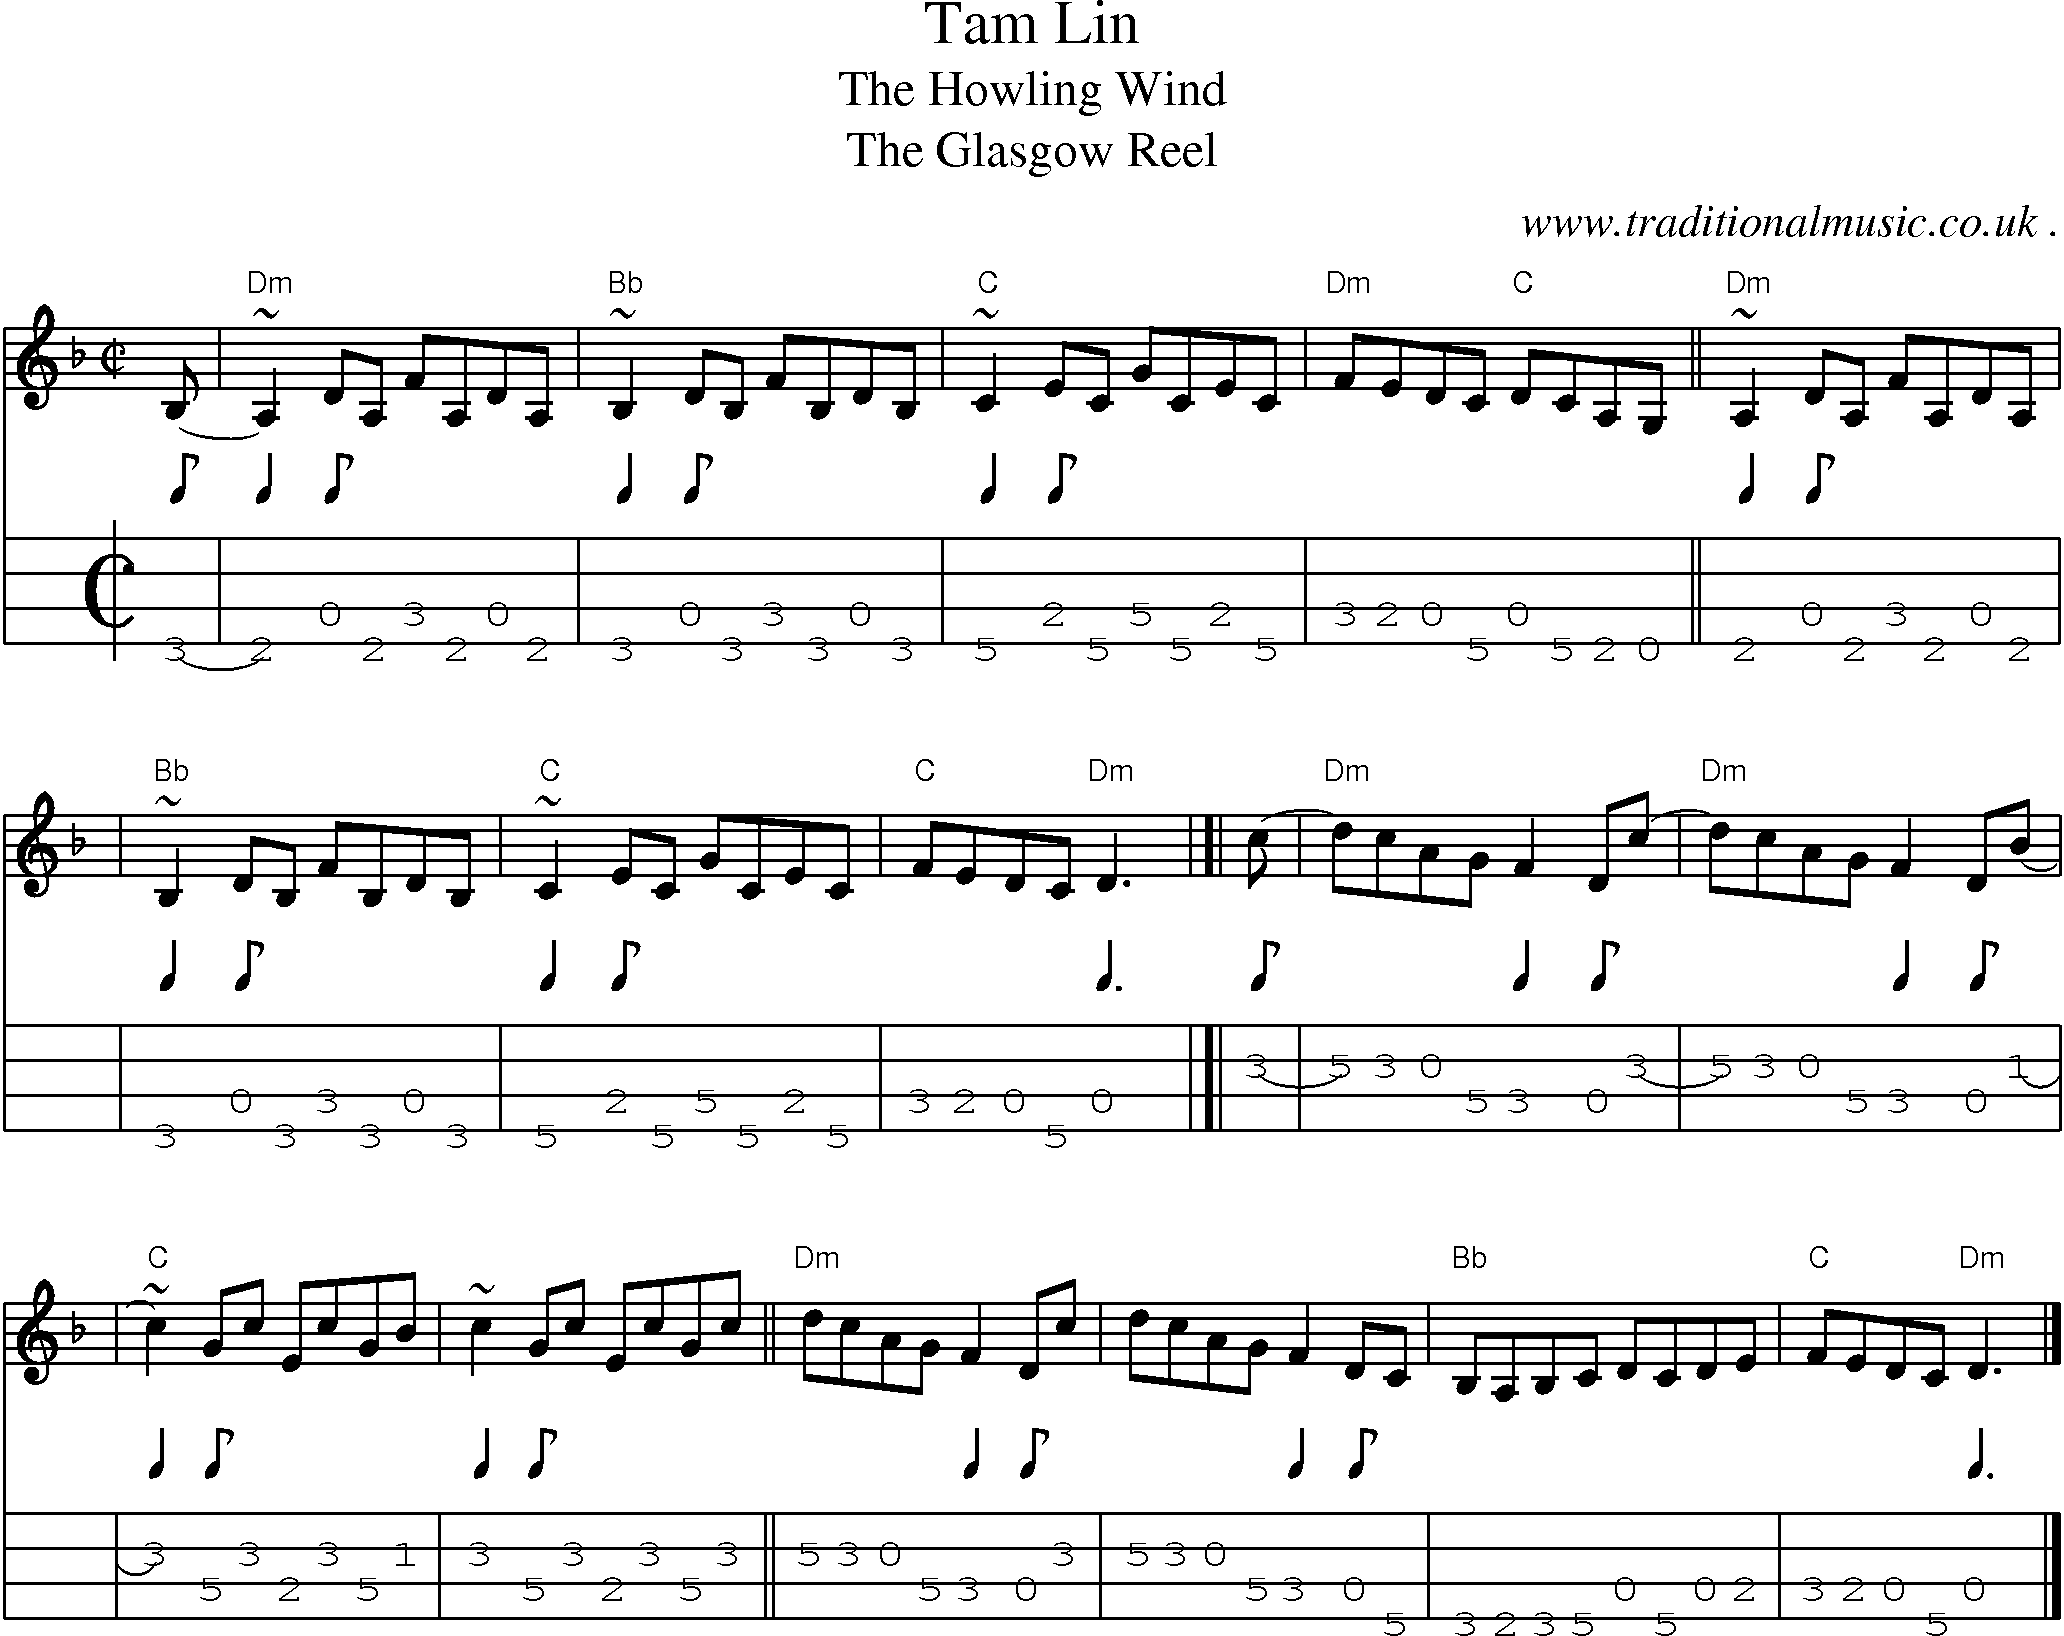 Sheet-music  score, Chords and Mandolin Tabs for Tam Lin